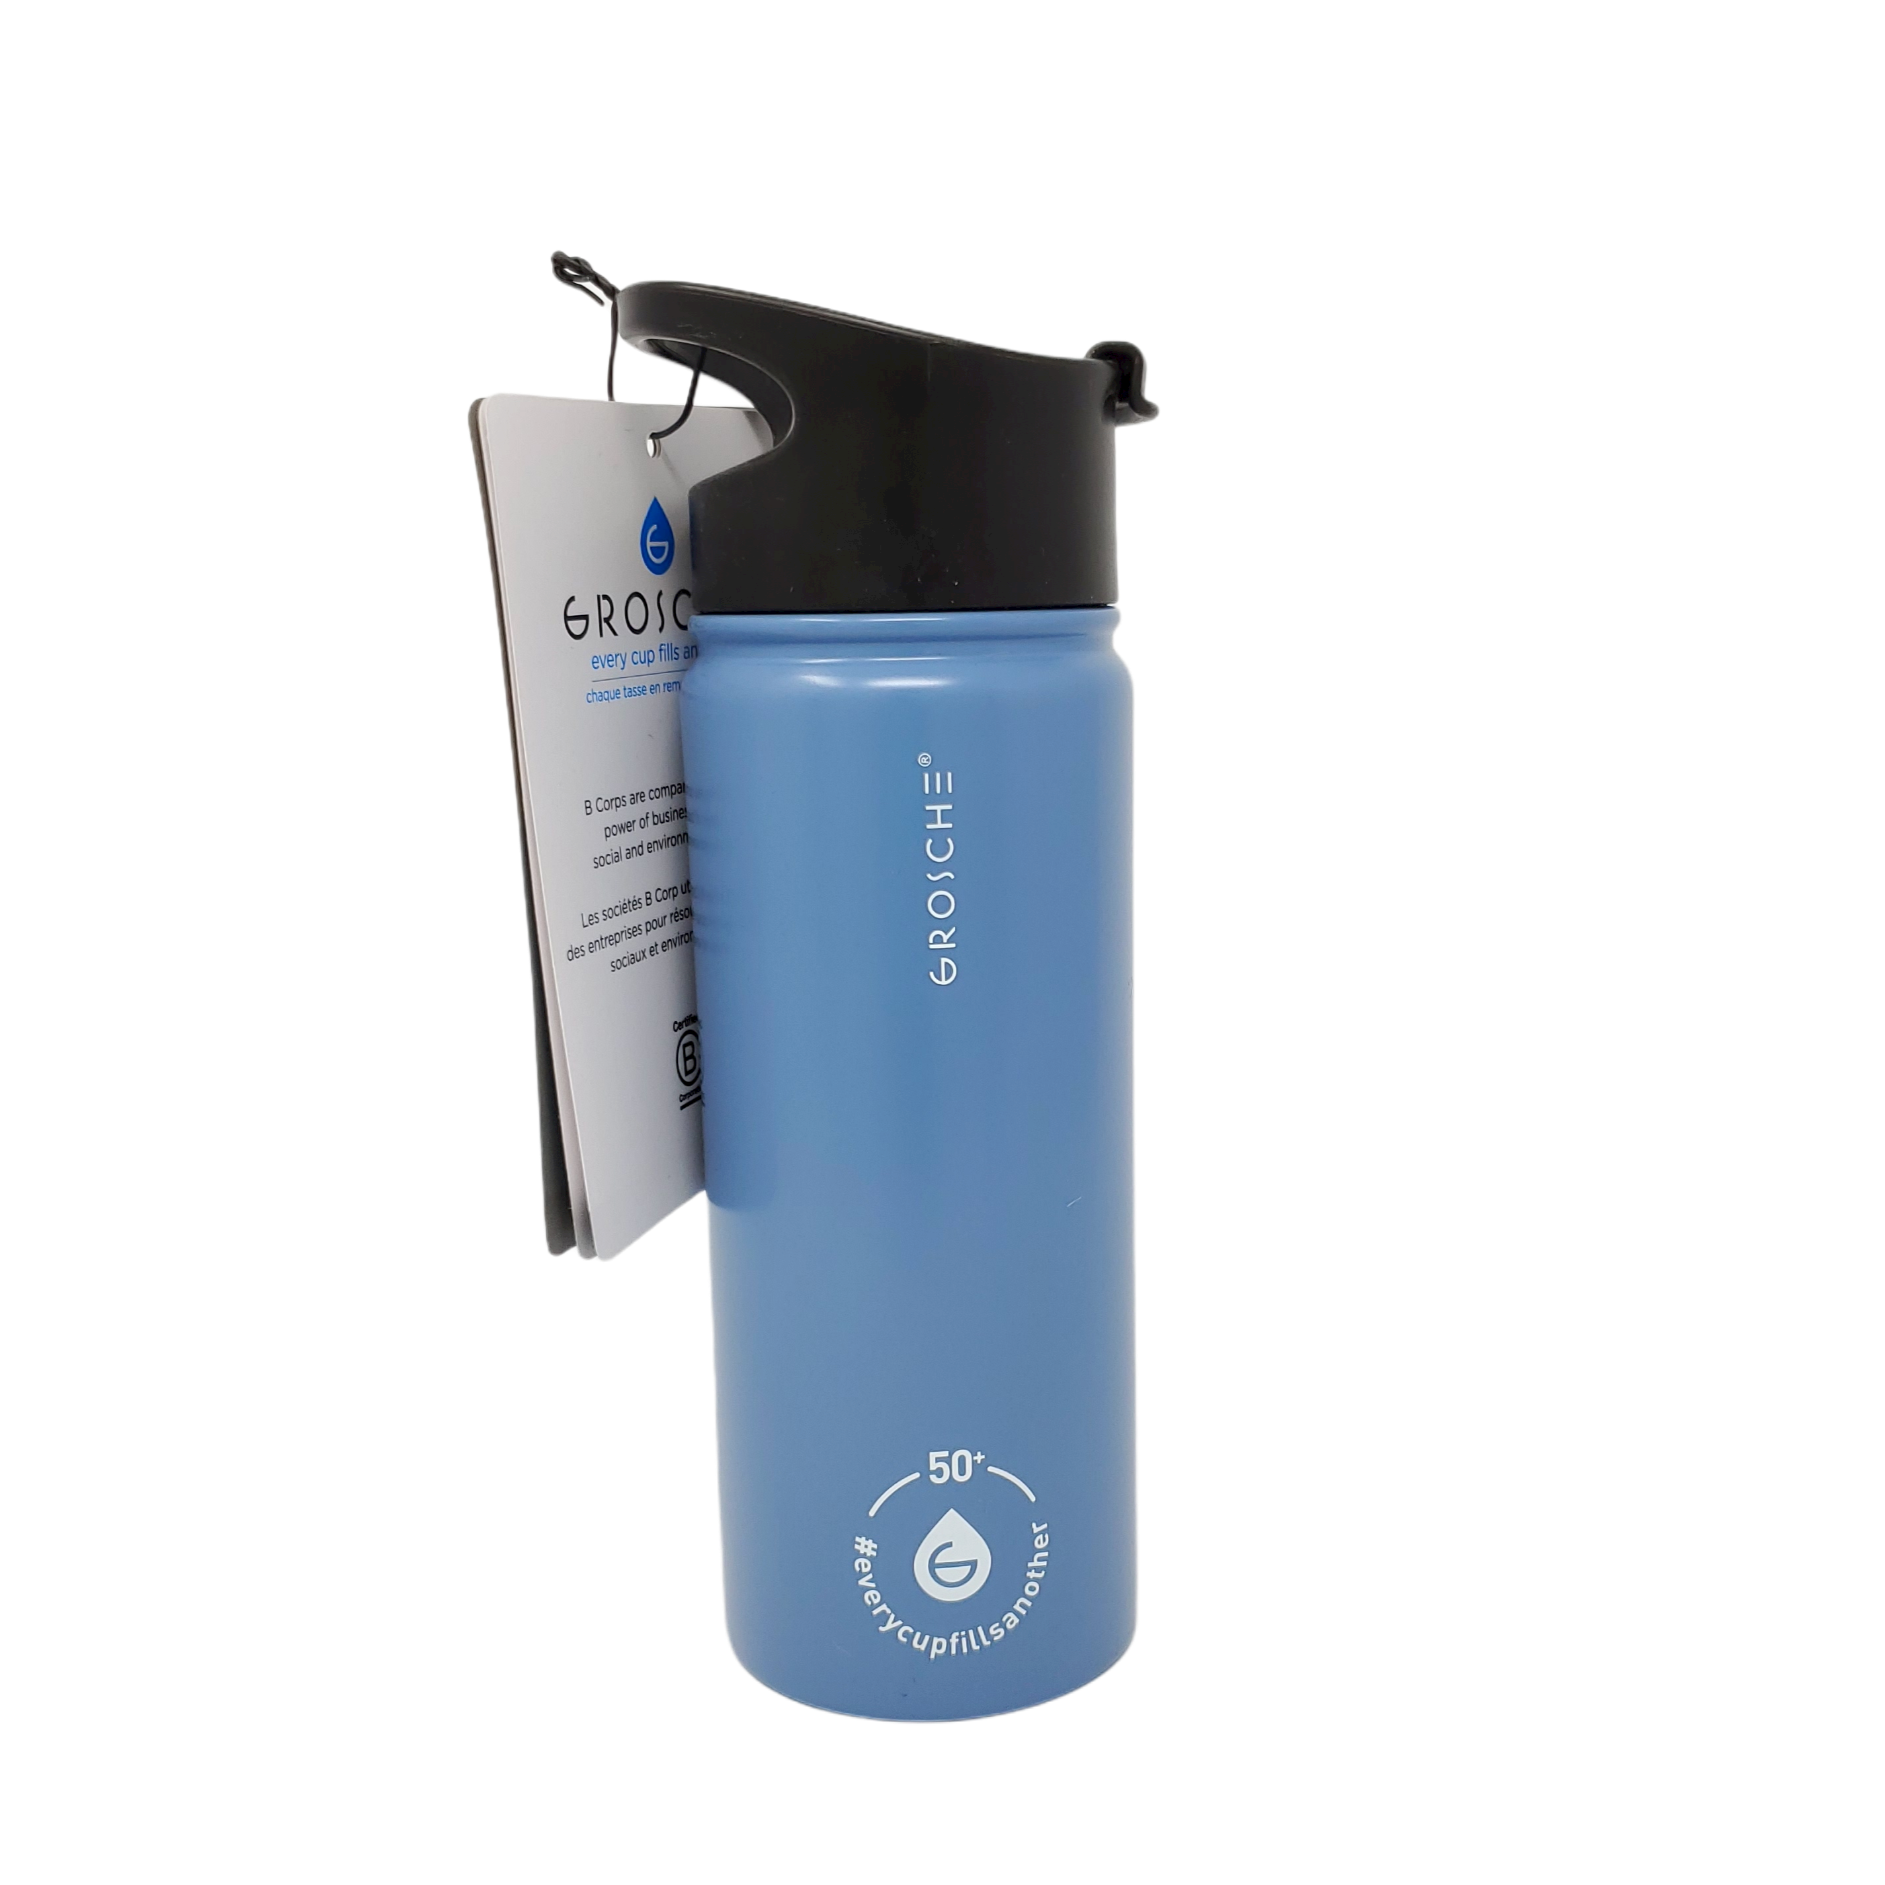 Grosche CHICAGO STEEL Insulated Tea Infusion Flask - Slate Blue